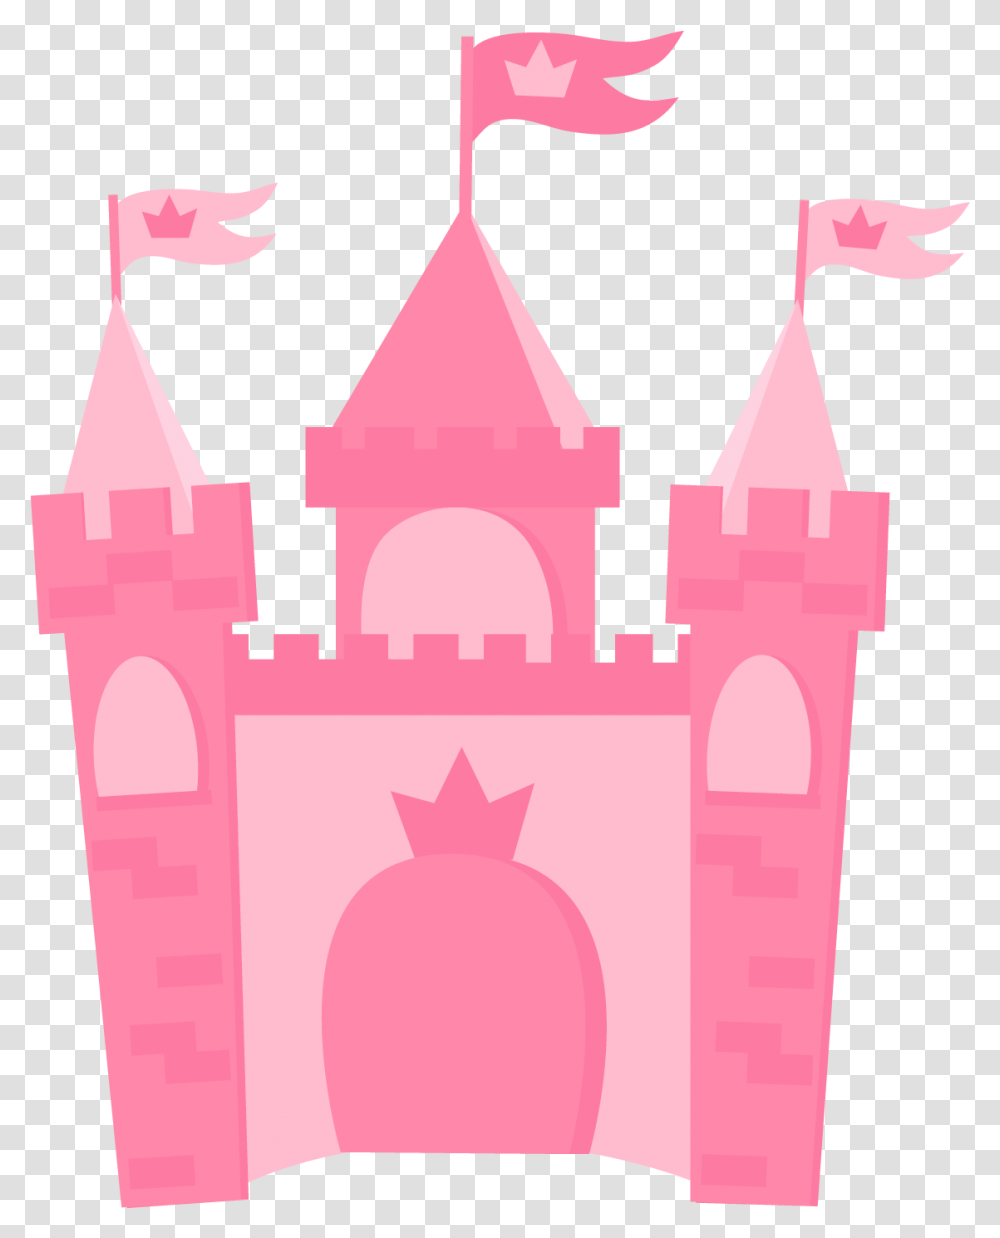 Snow White Castle Clip Art, Jewelry, Accessories, Crown, People Transparent Png